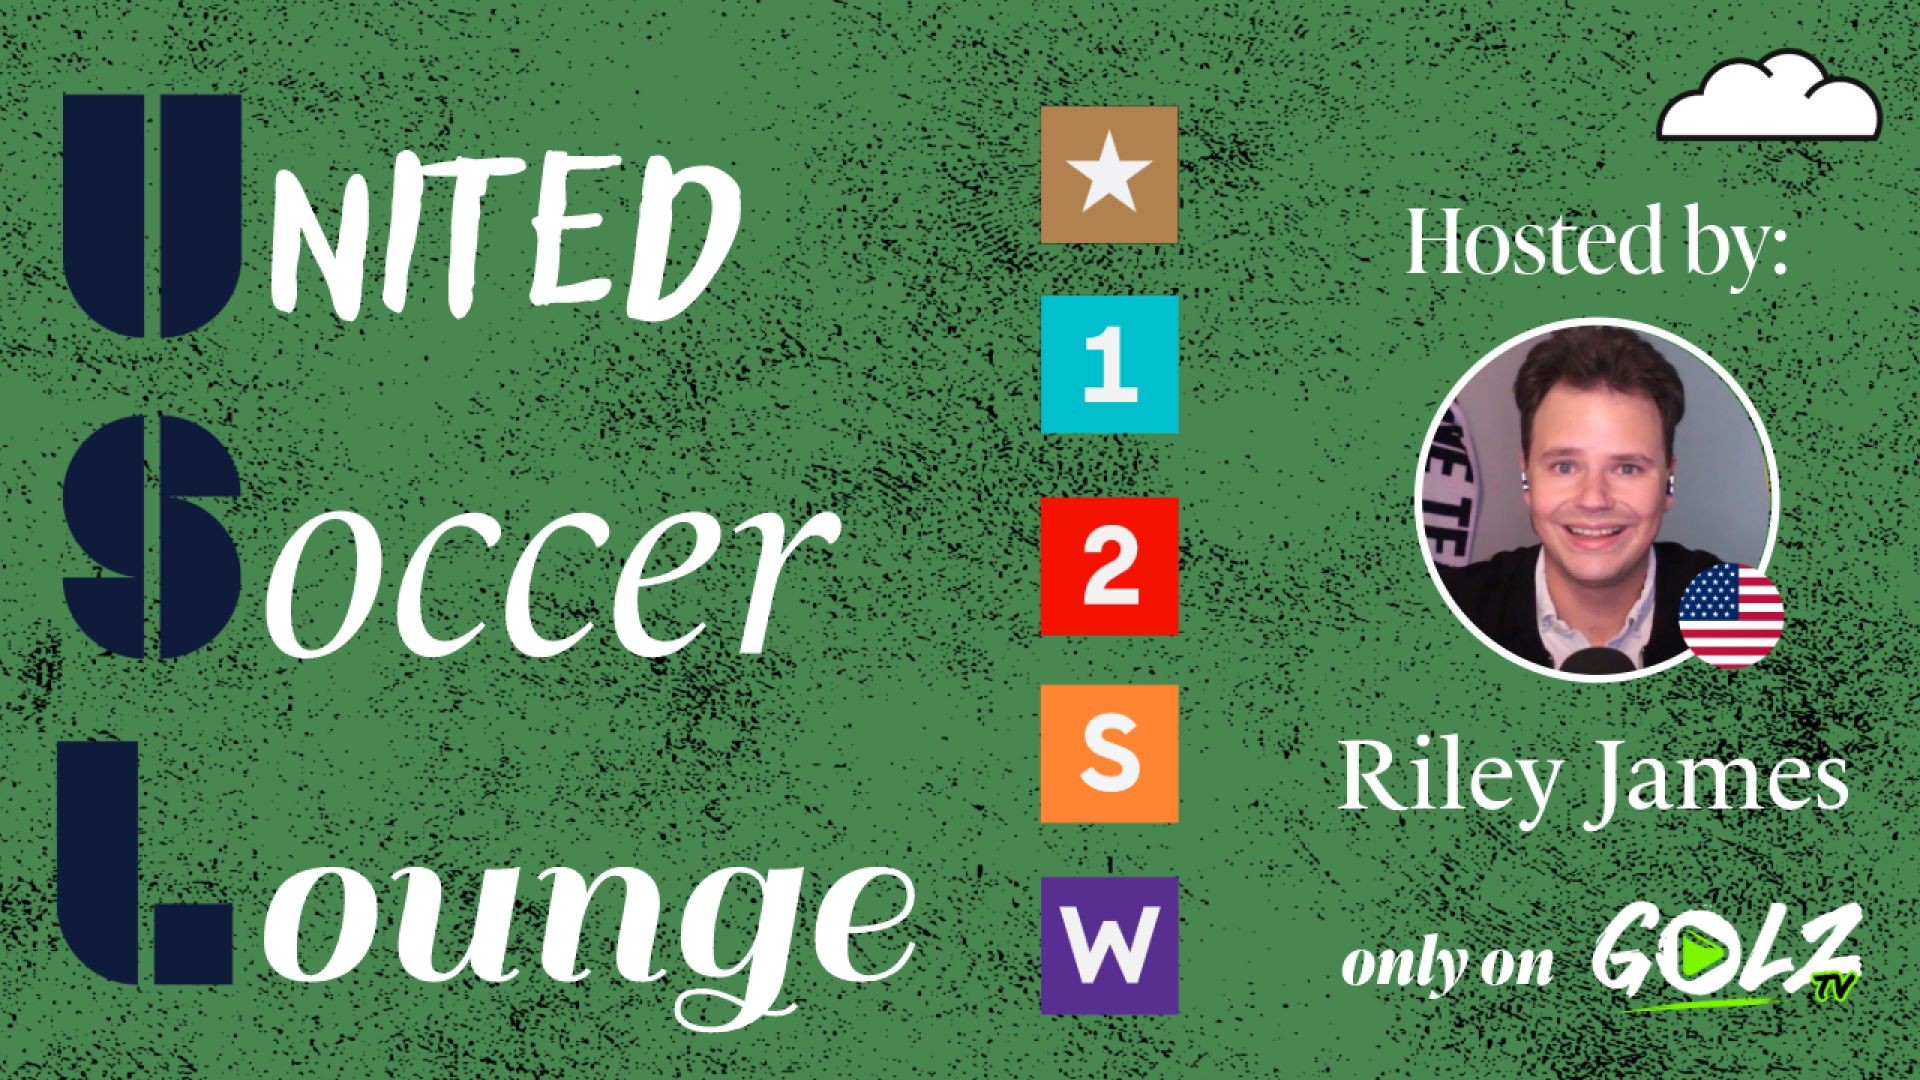 Introducing the United Soccer Lounge